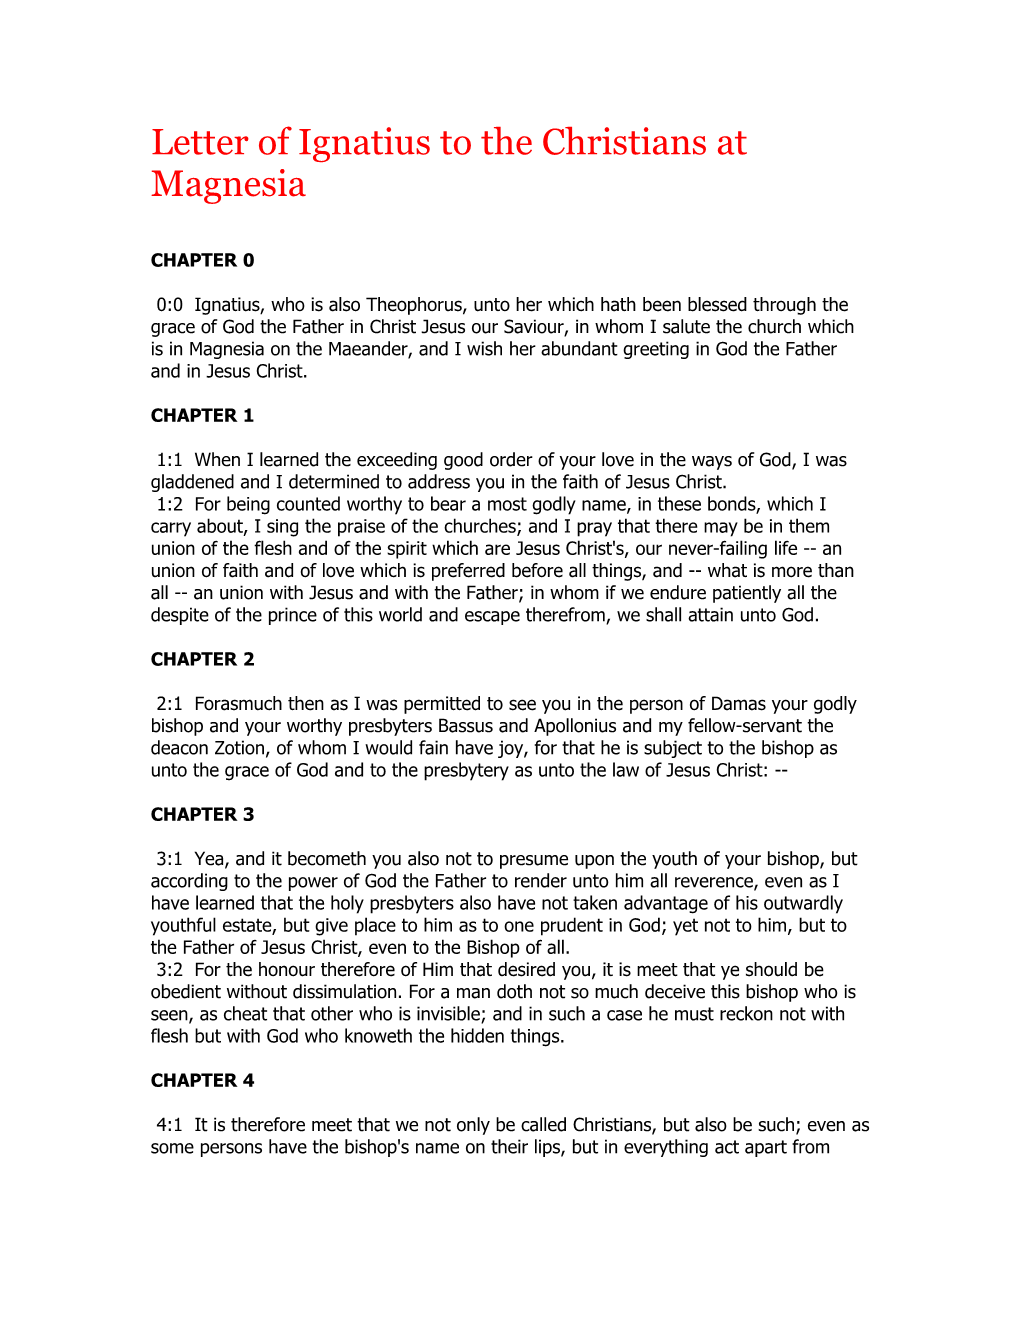 Letter of Ignatius to the Christians at Magnesia